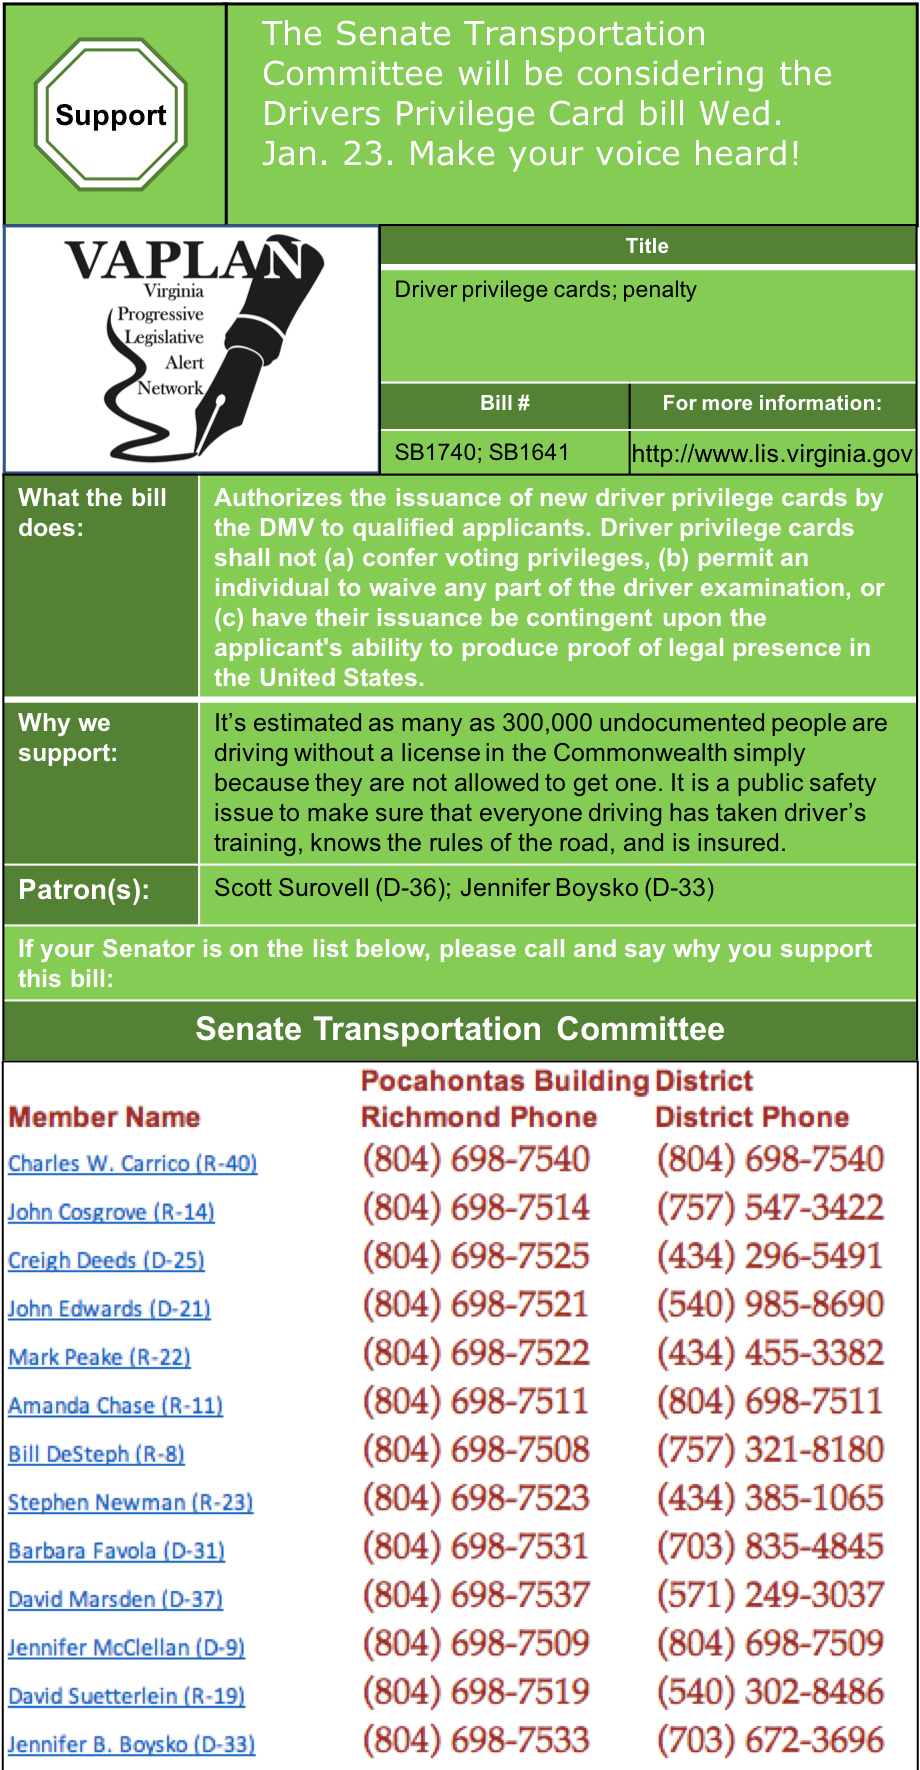 ALERT: Senate Transportation Committee to consider driver privilege cards on Wed. Jan. 23!